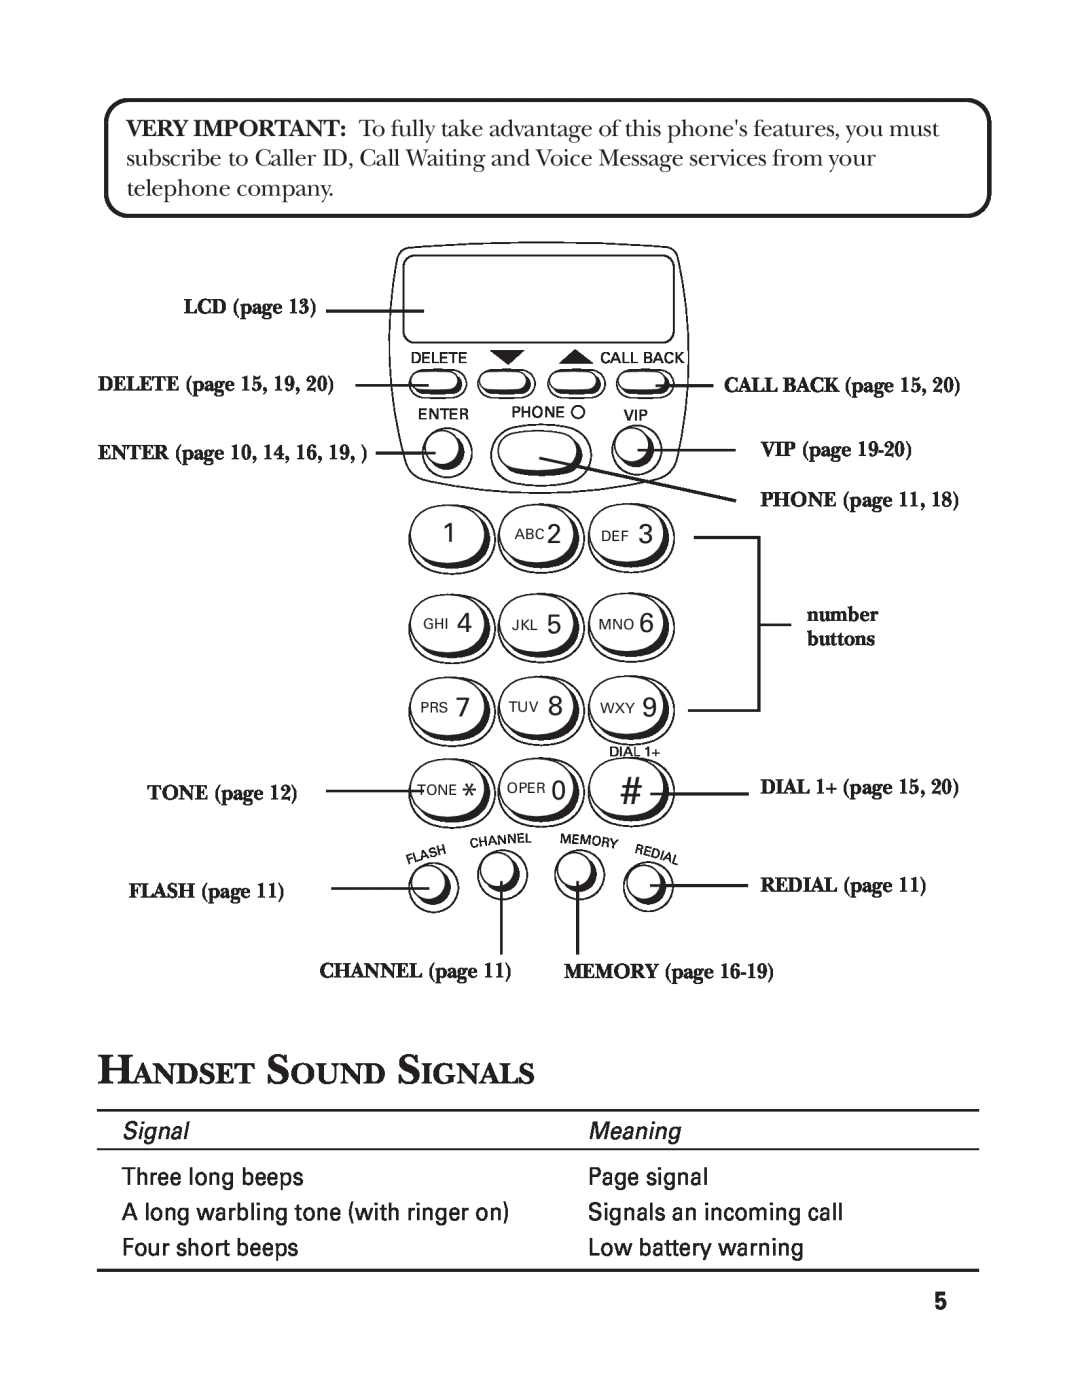 GE 2-9772 Handset Sound Signals, Meaning, Three long beeps, Page signal, A long warbling tone with ringer on, LCD page 